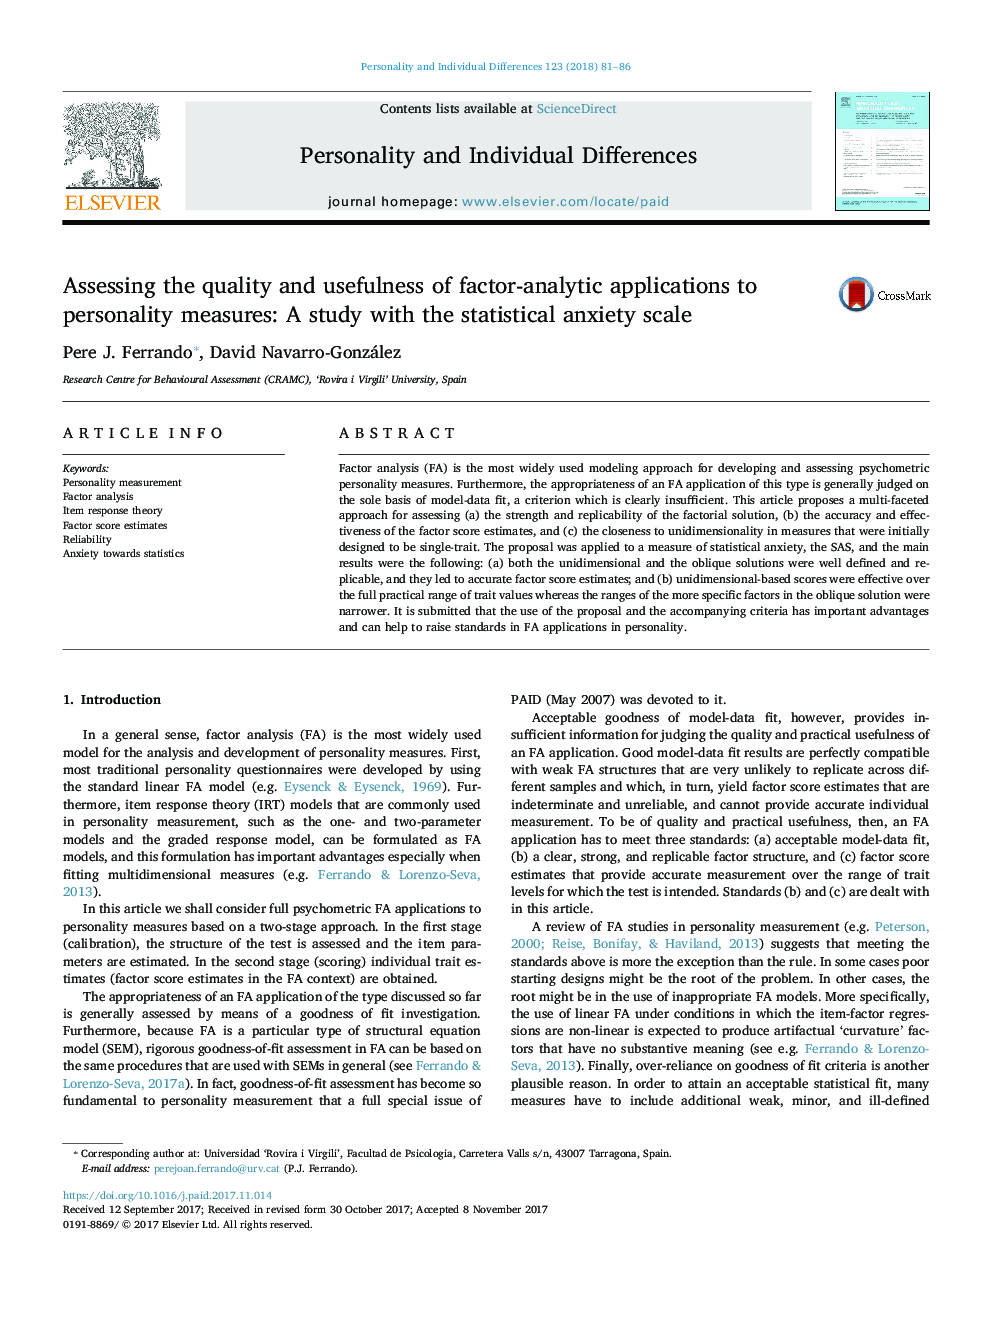 Assessing the quality and usefulness of factor-analytic applications to personality measures: A study with the statistical anxiety scale